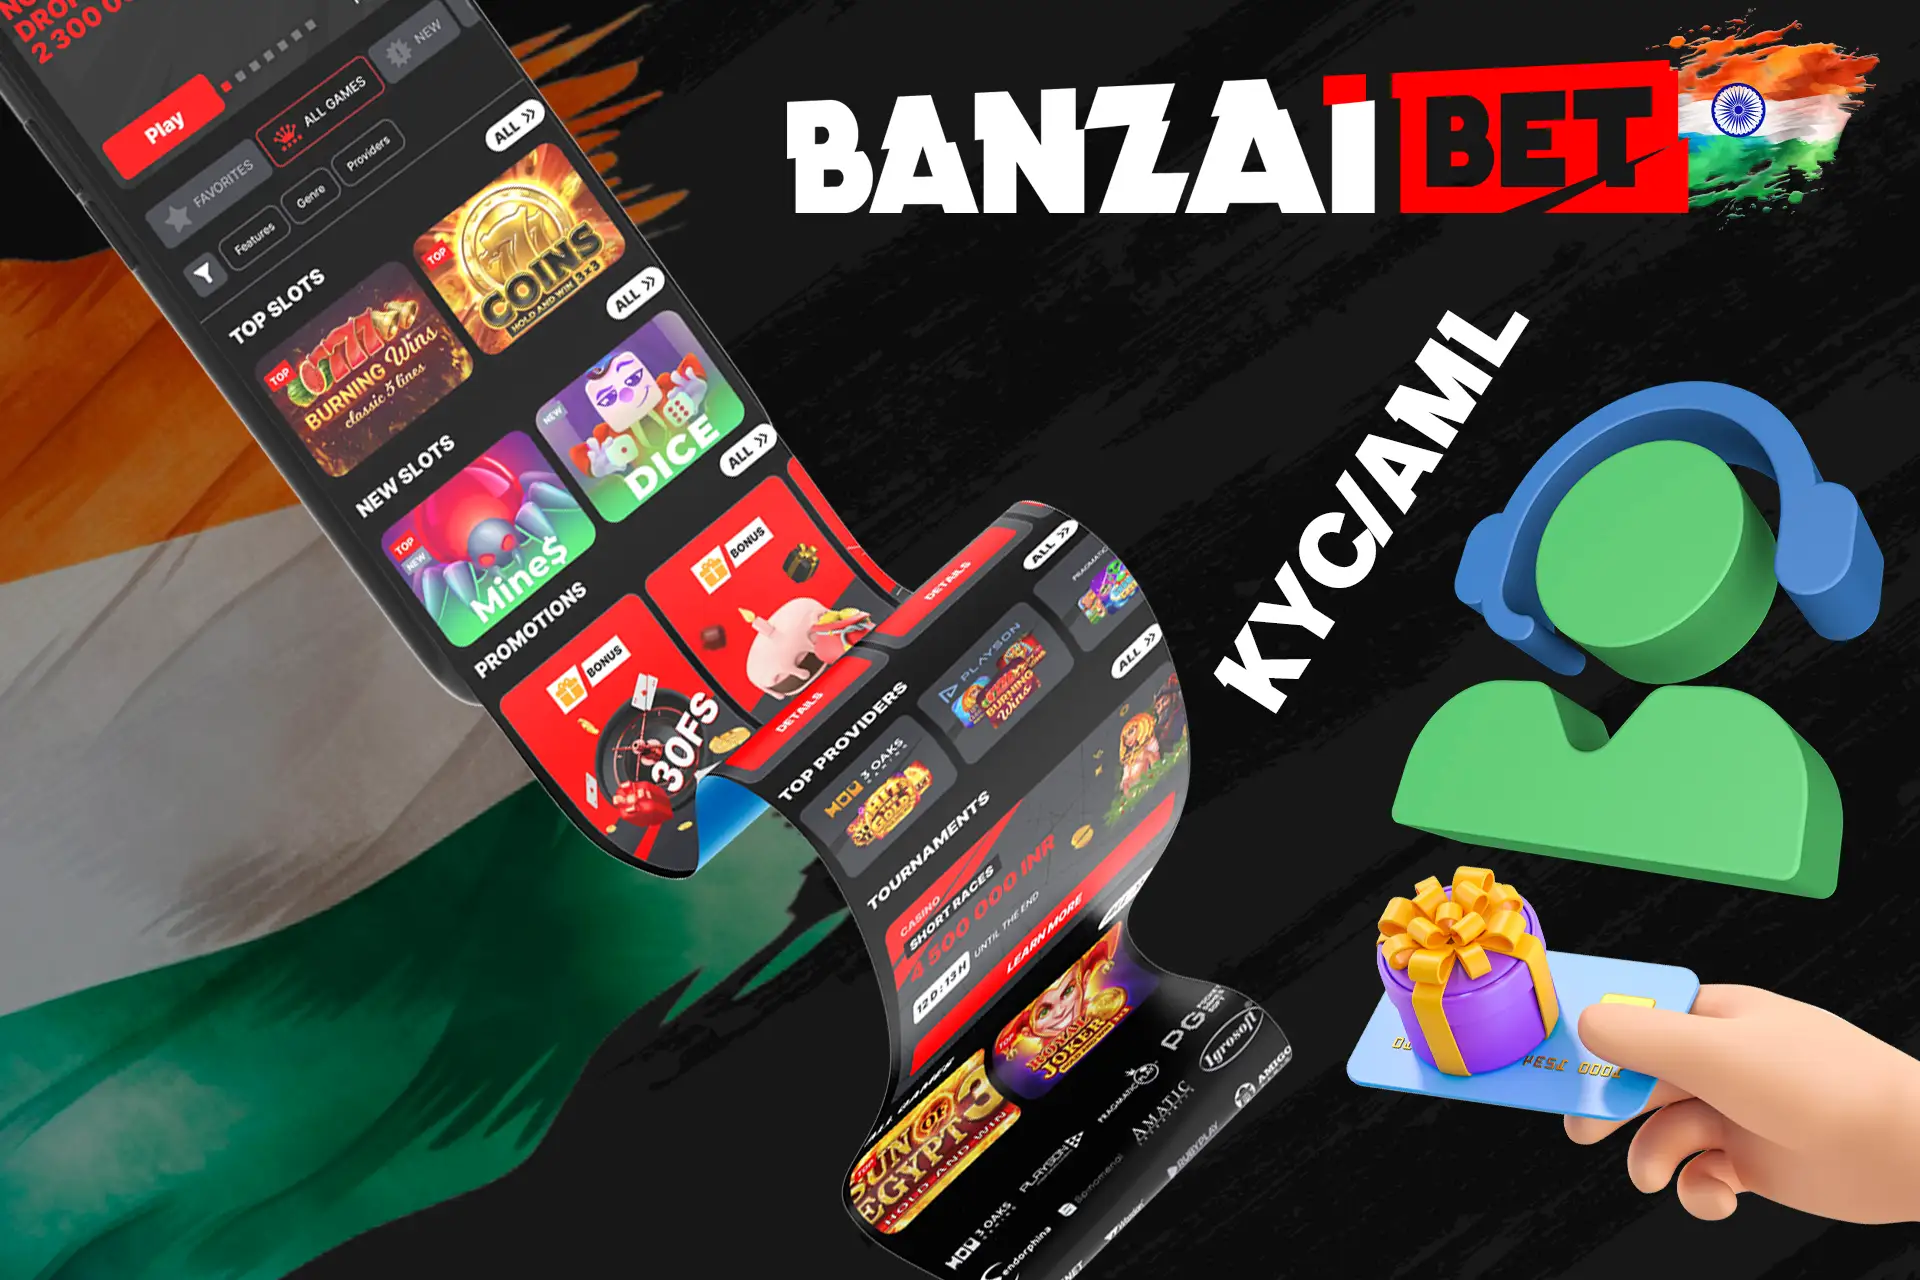 Remember to pay attention to the key points when logging into Banzaibet India for the first time